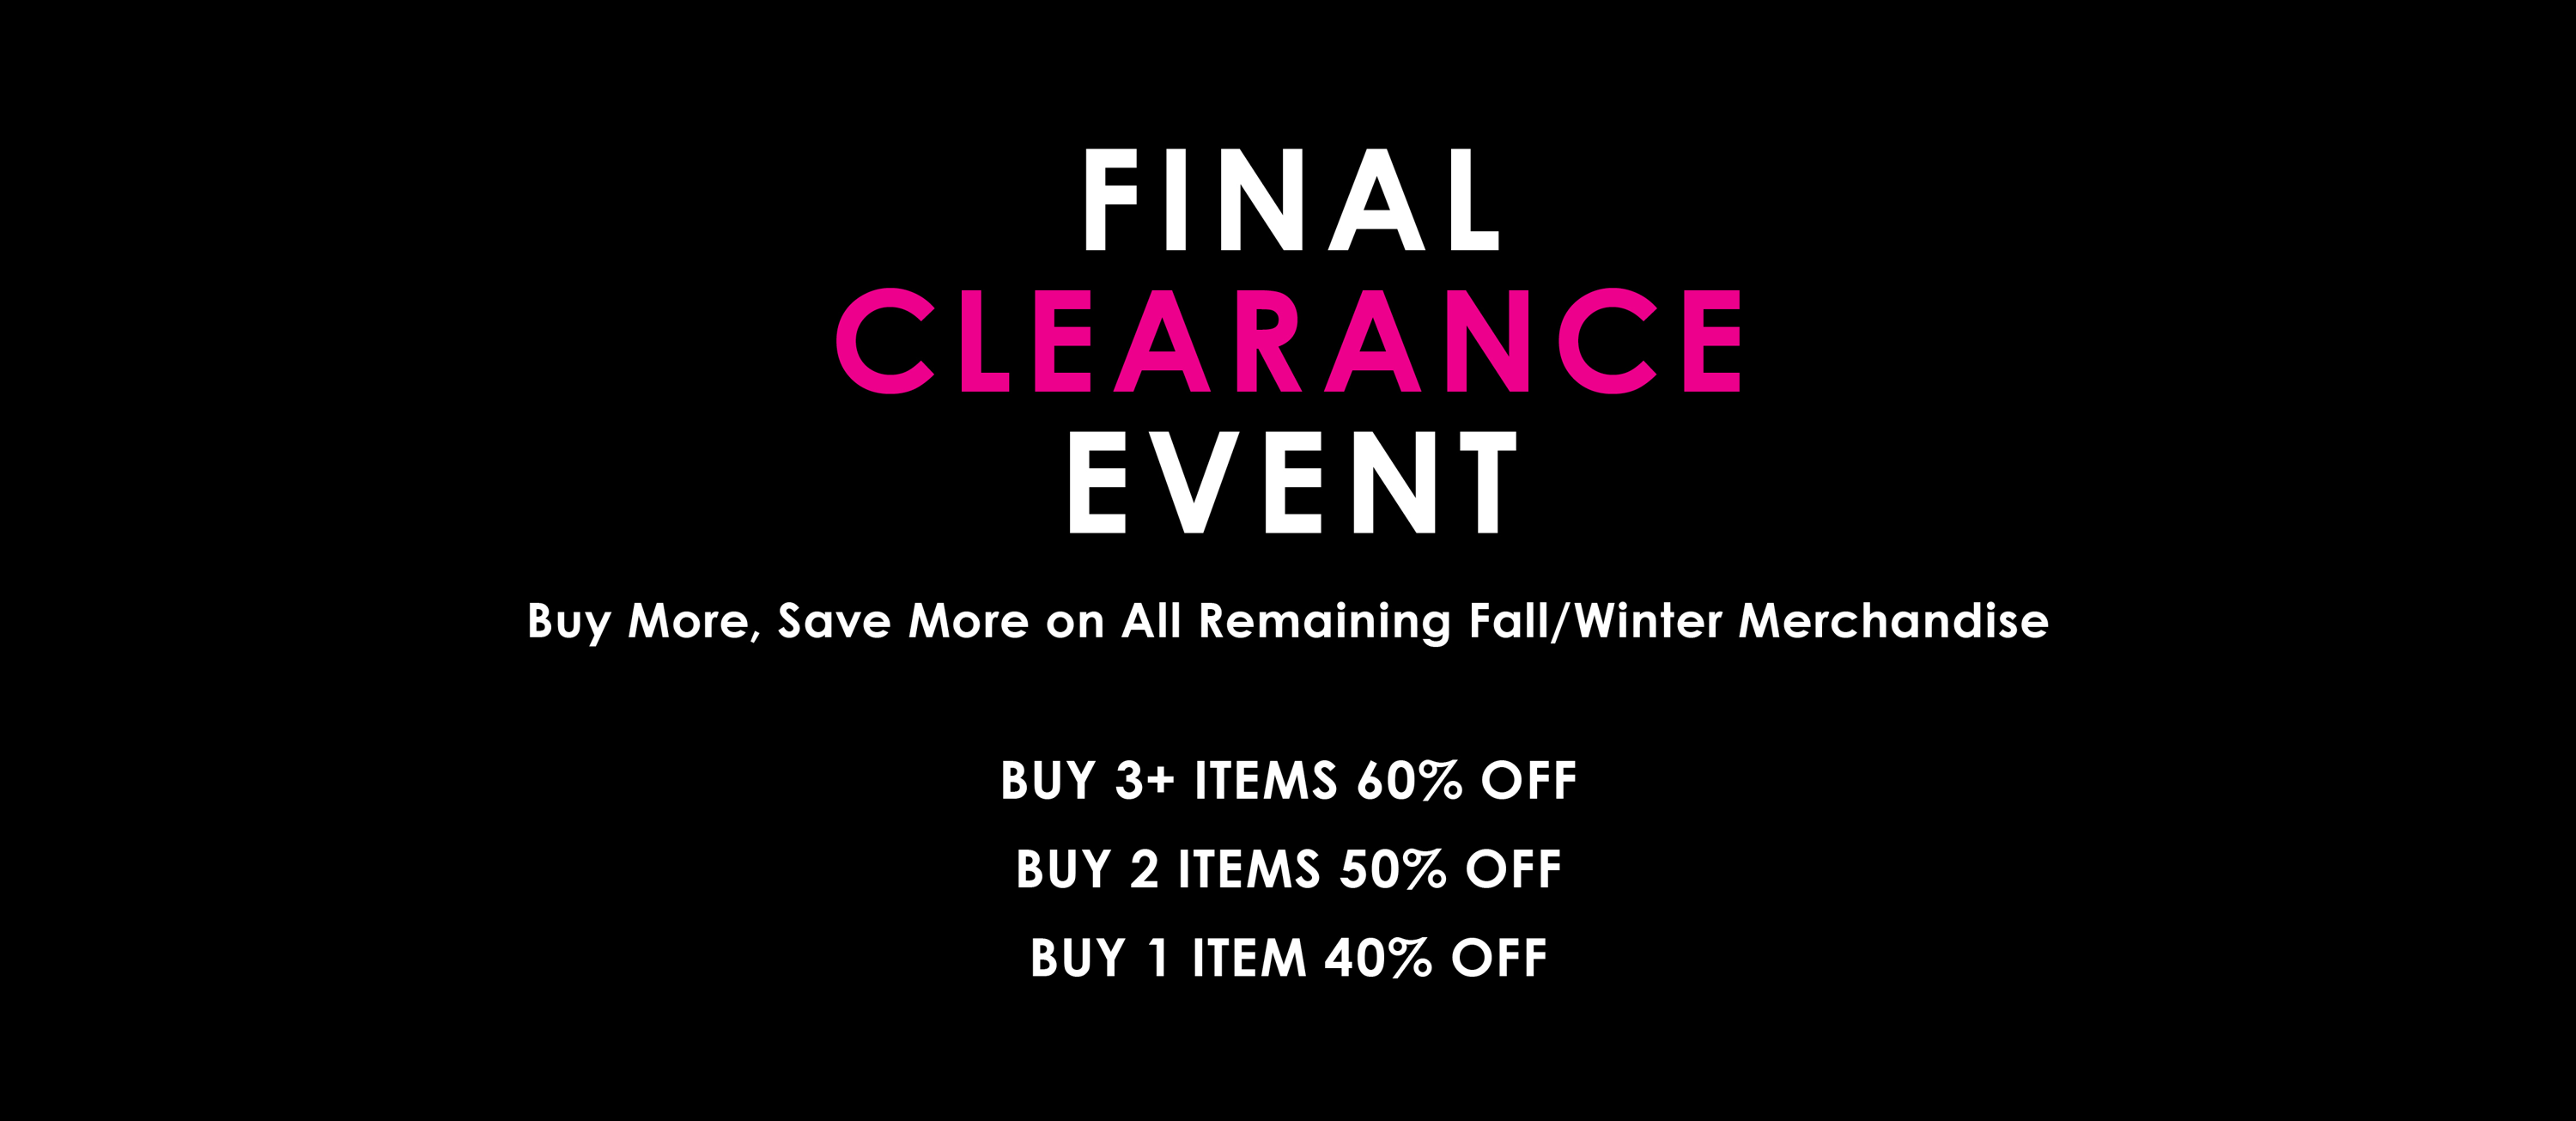 Shop the Final Clearance Event